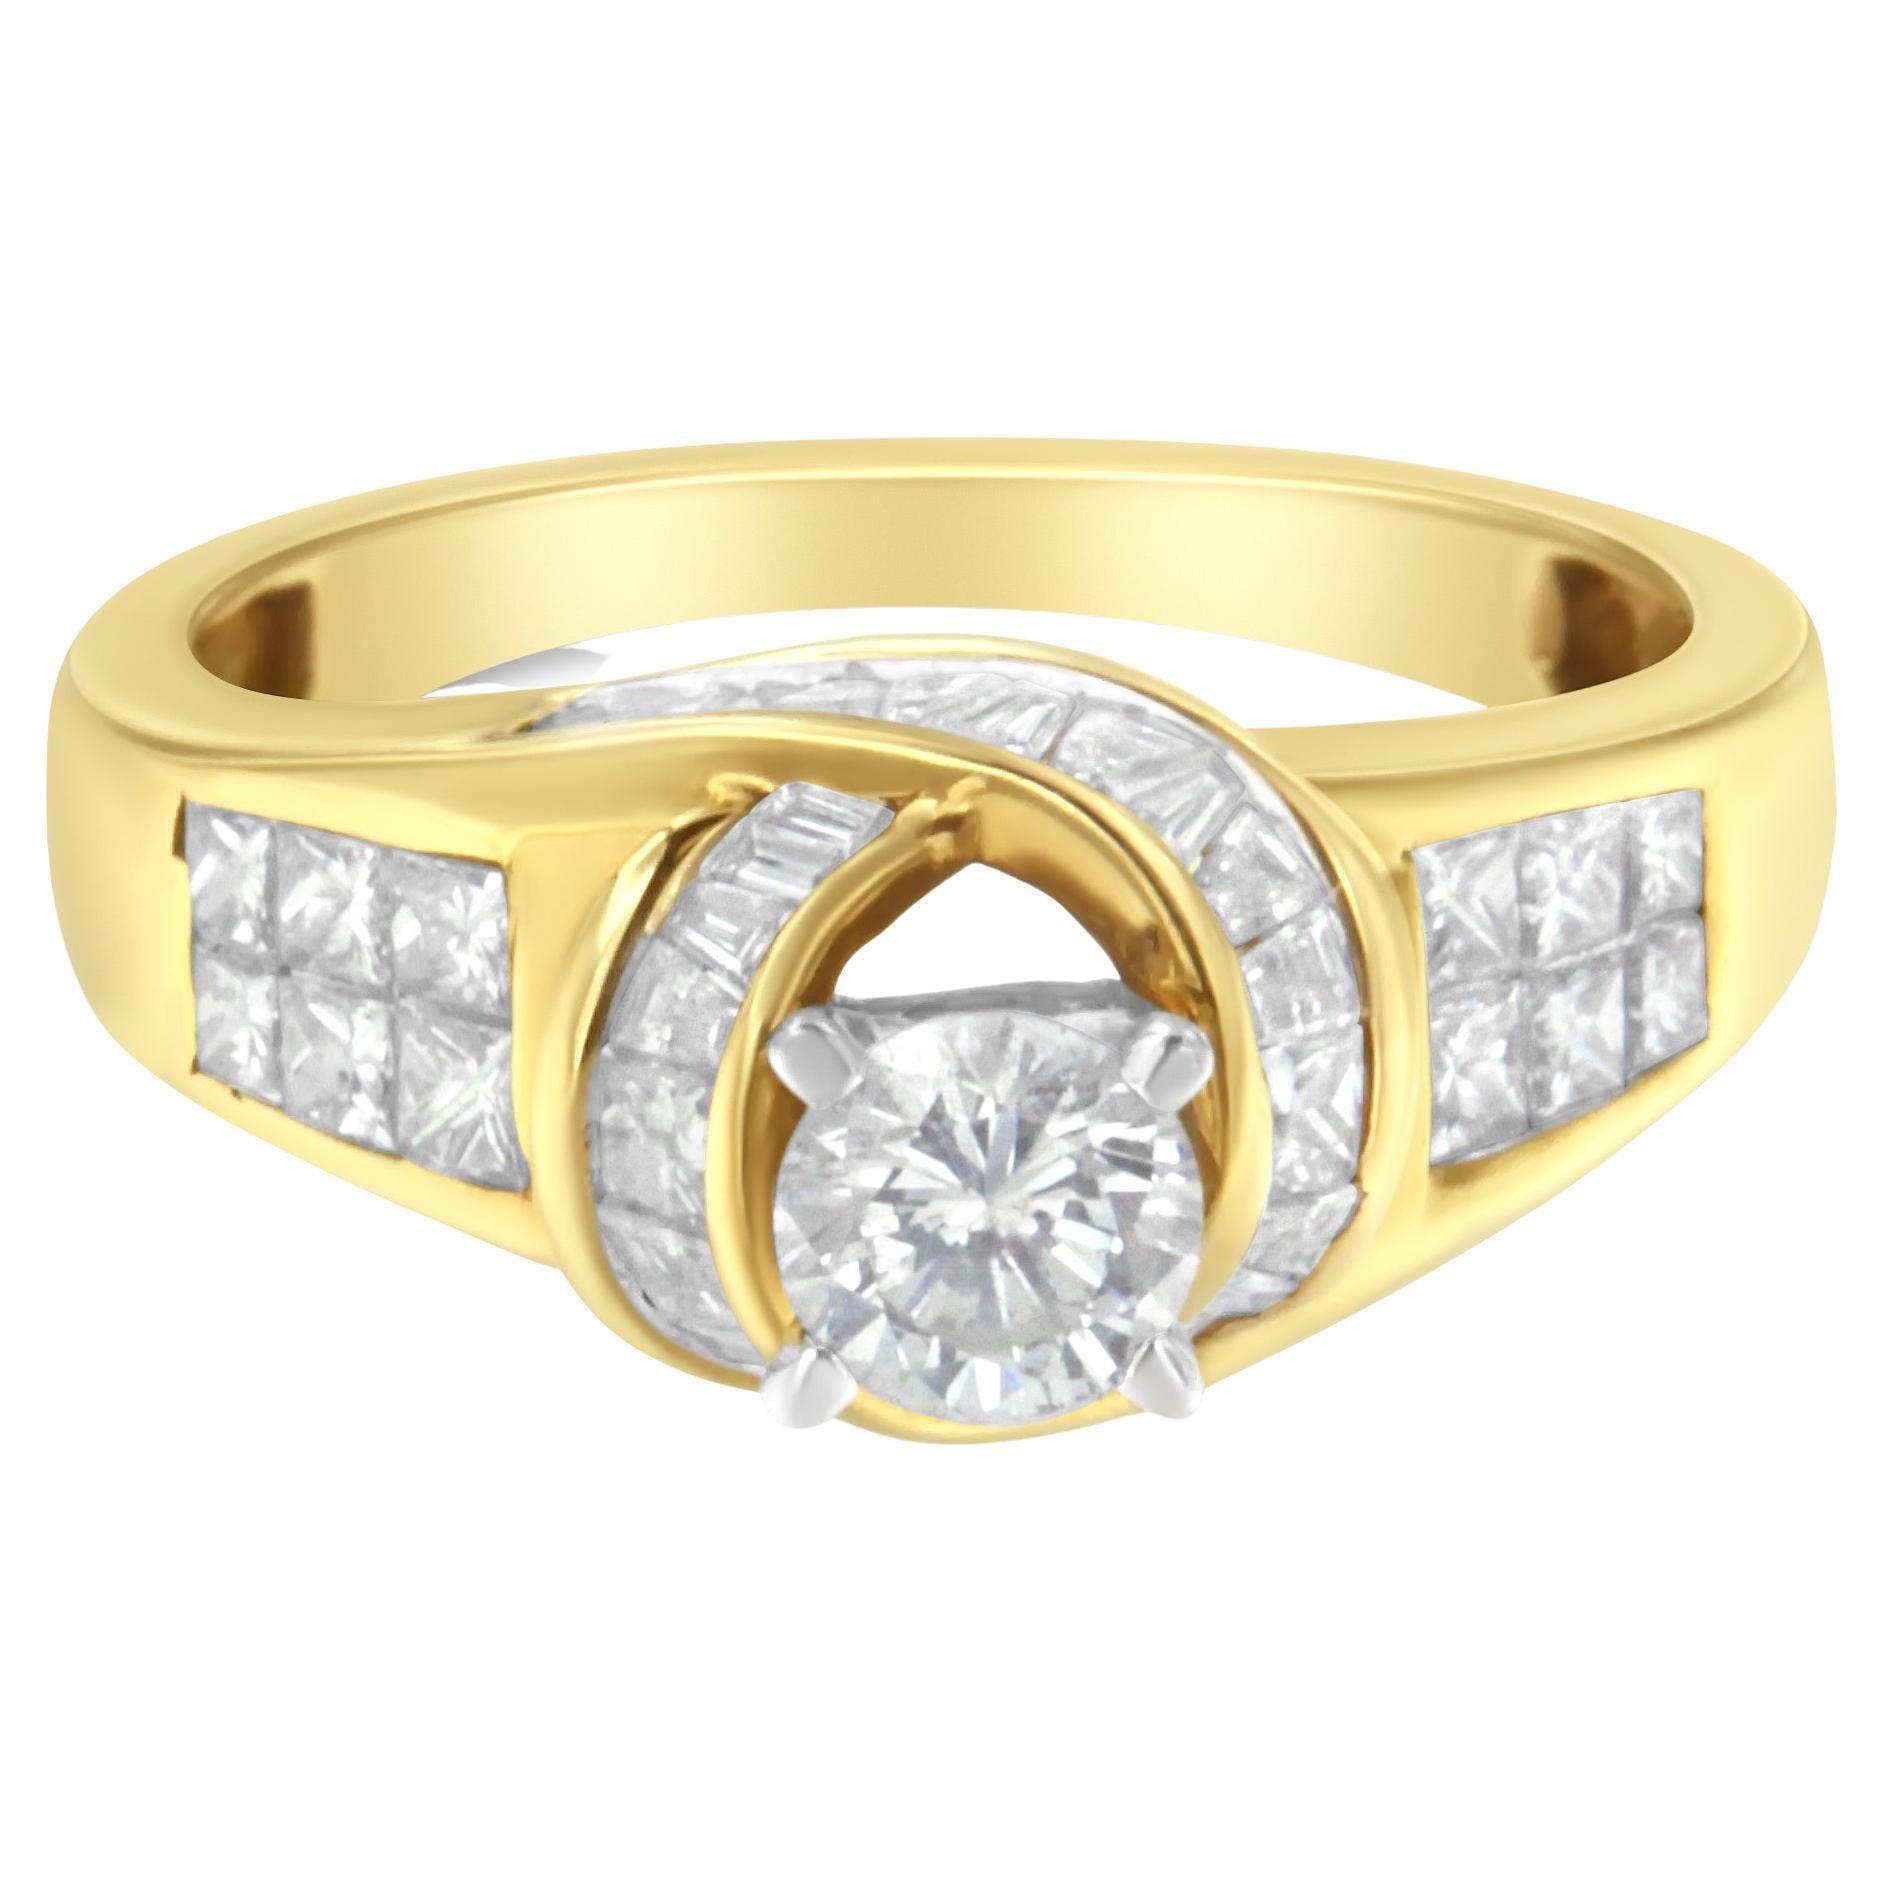 14K Two-Toned Gold 1 1/8 Carat Diamond Cocktail Ring